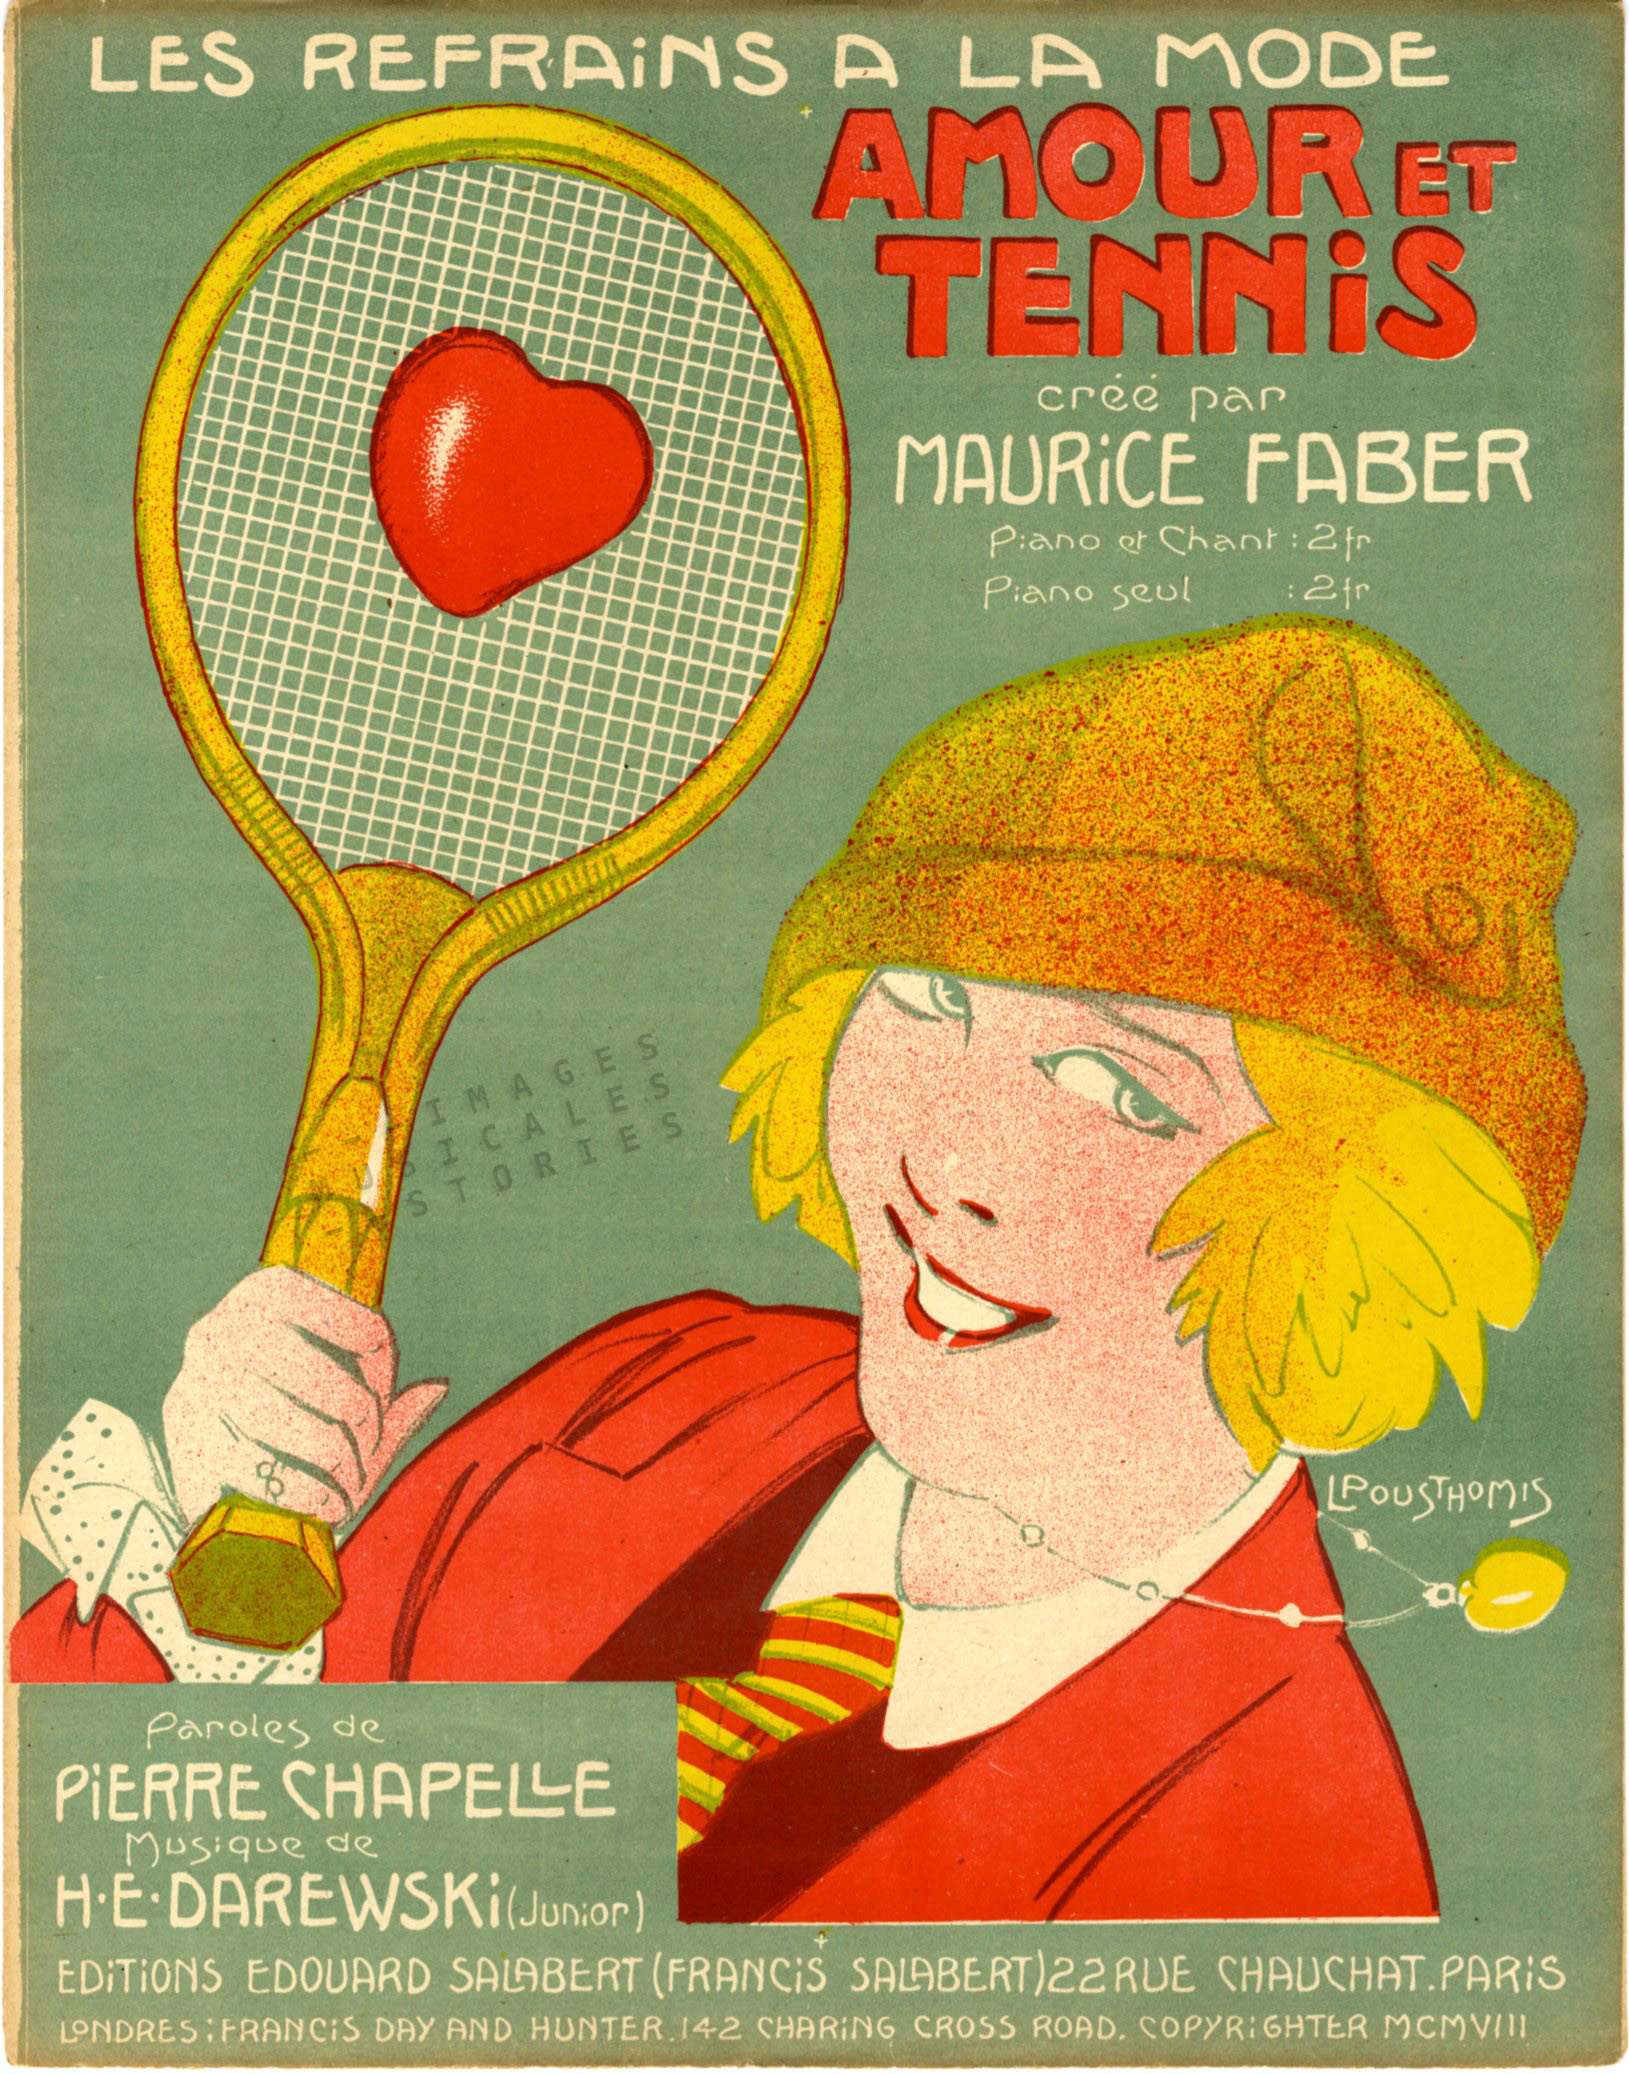 'Amour et Tennis' sheet music cover illustrated by Pousthomis